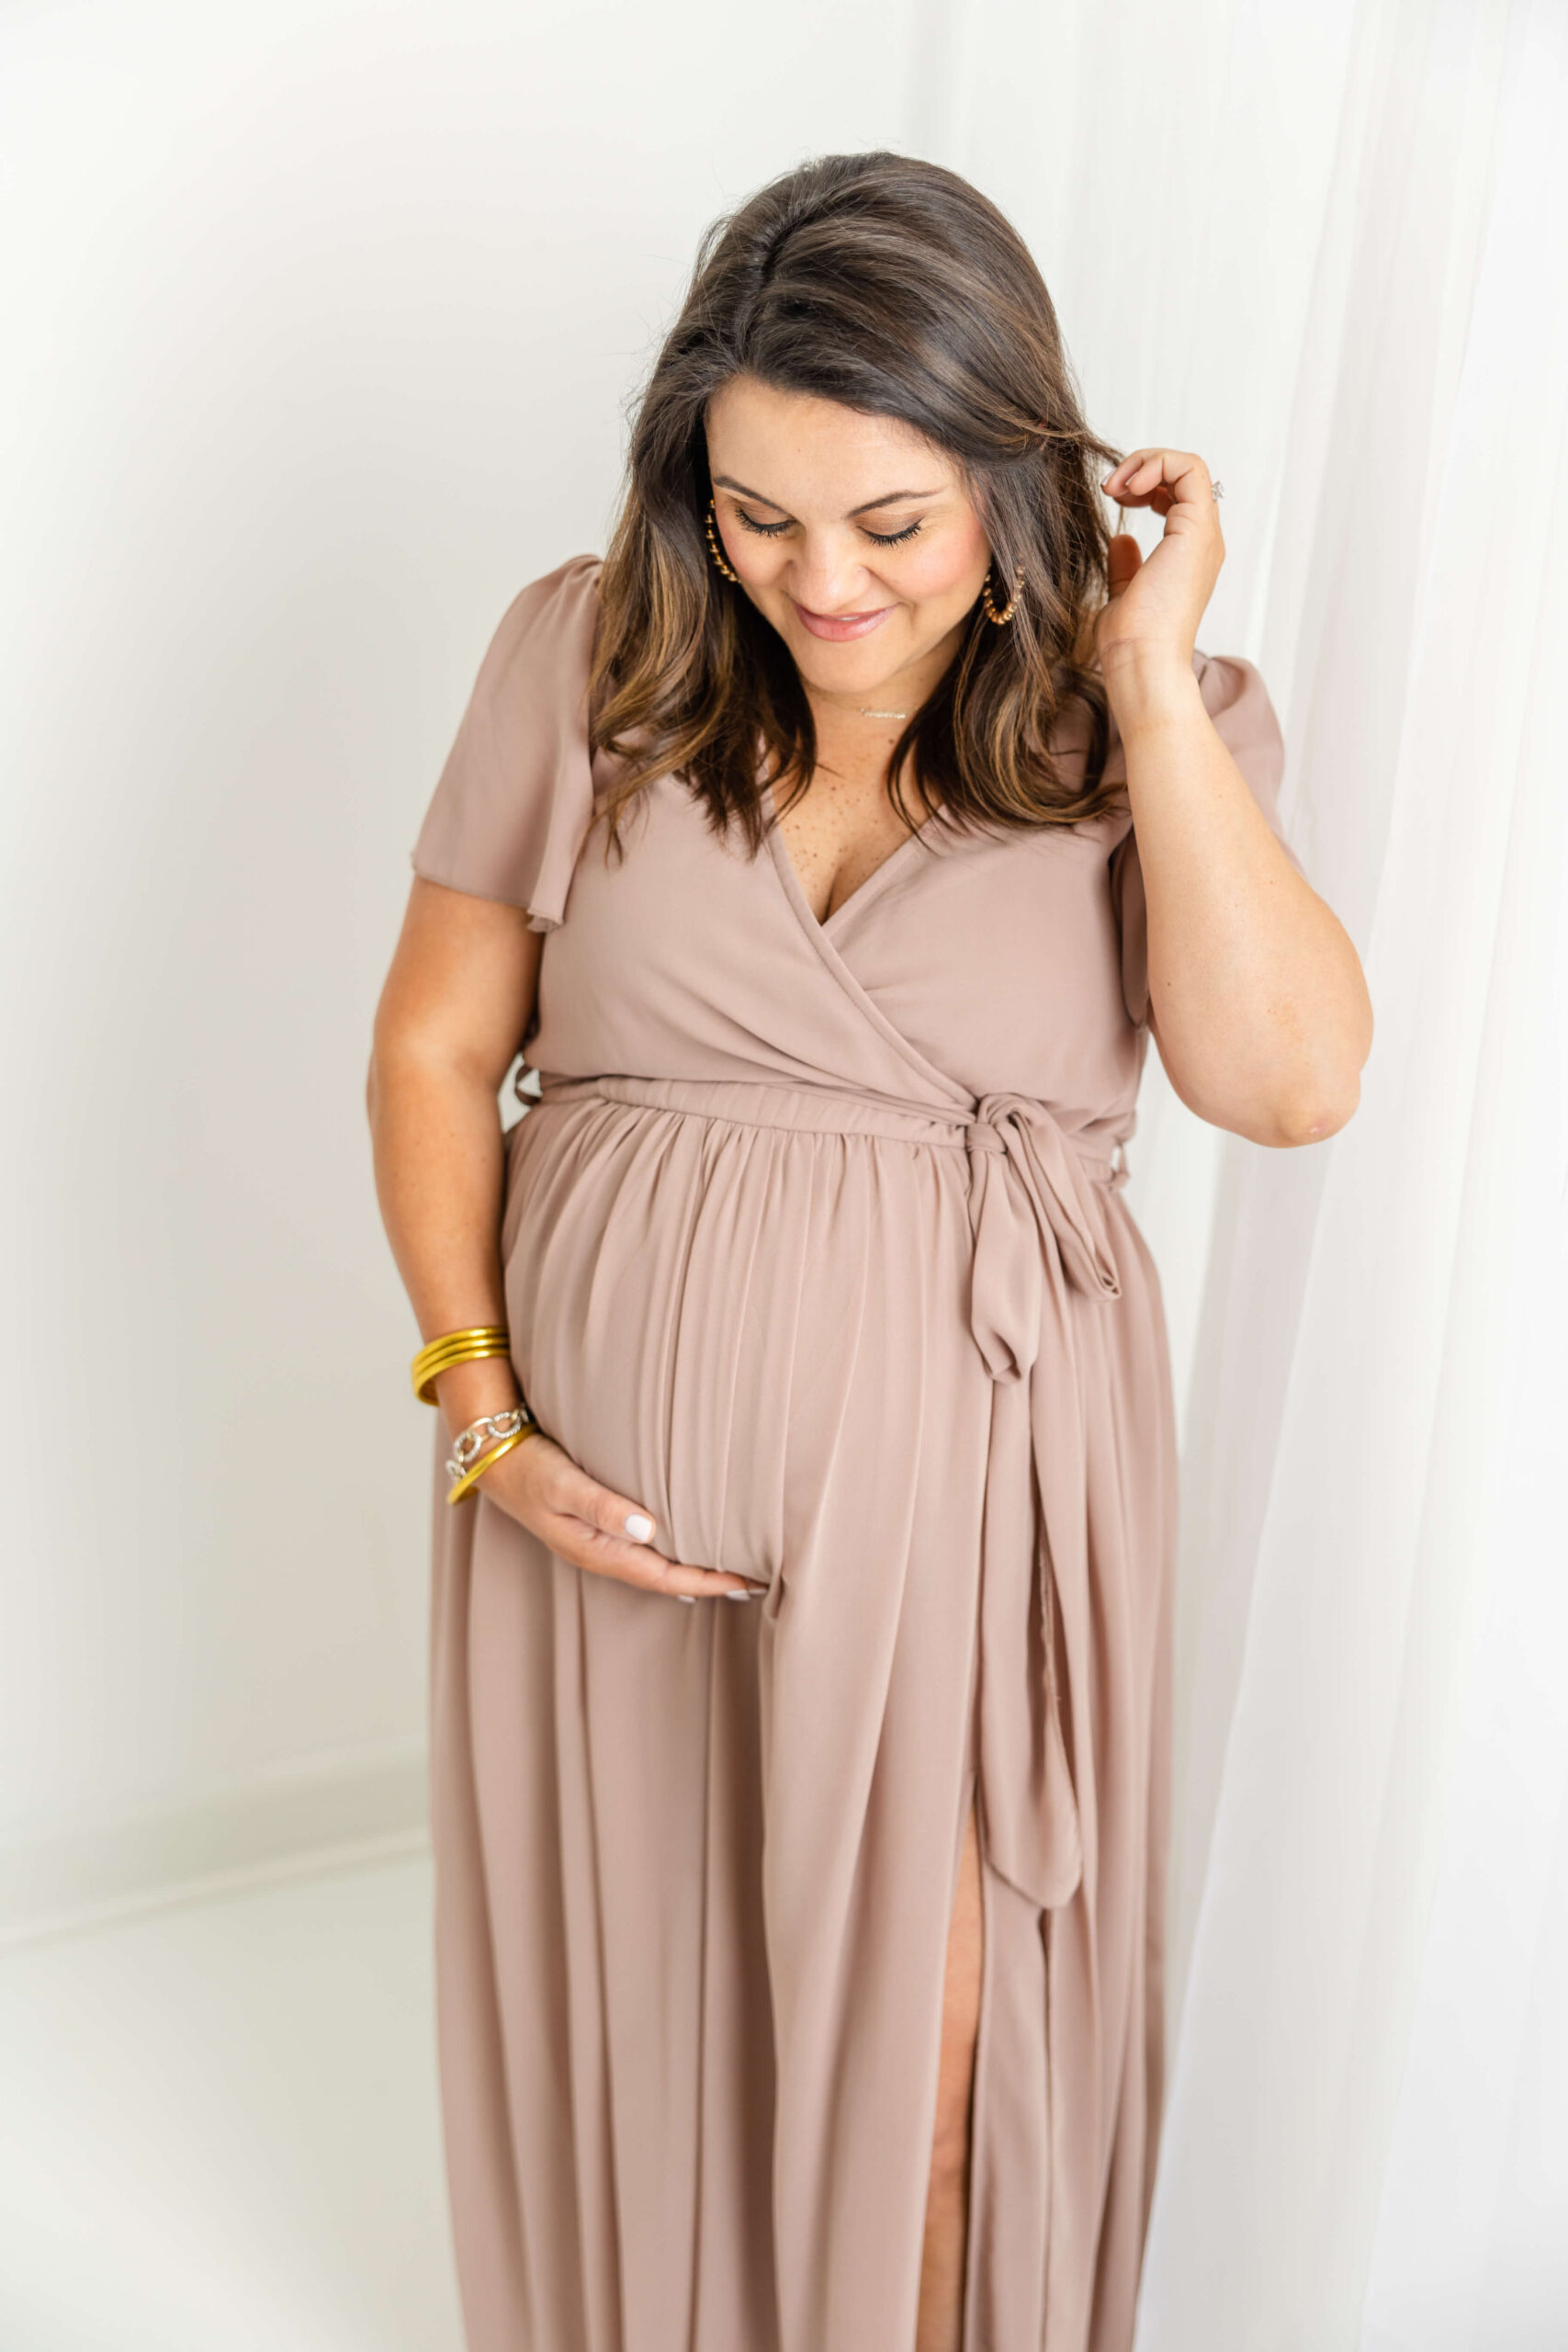 Soon to be mom in mauve dress. Local Places to Host a Baby Shower in Augusta